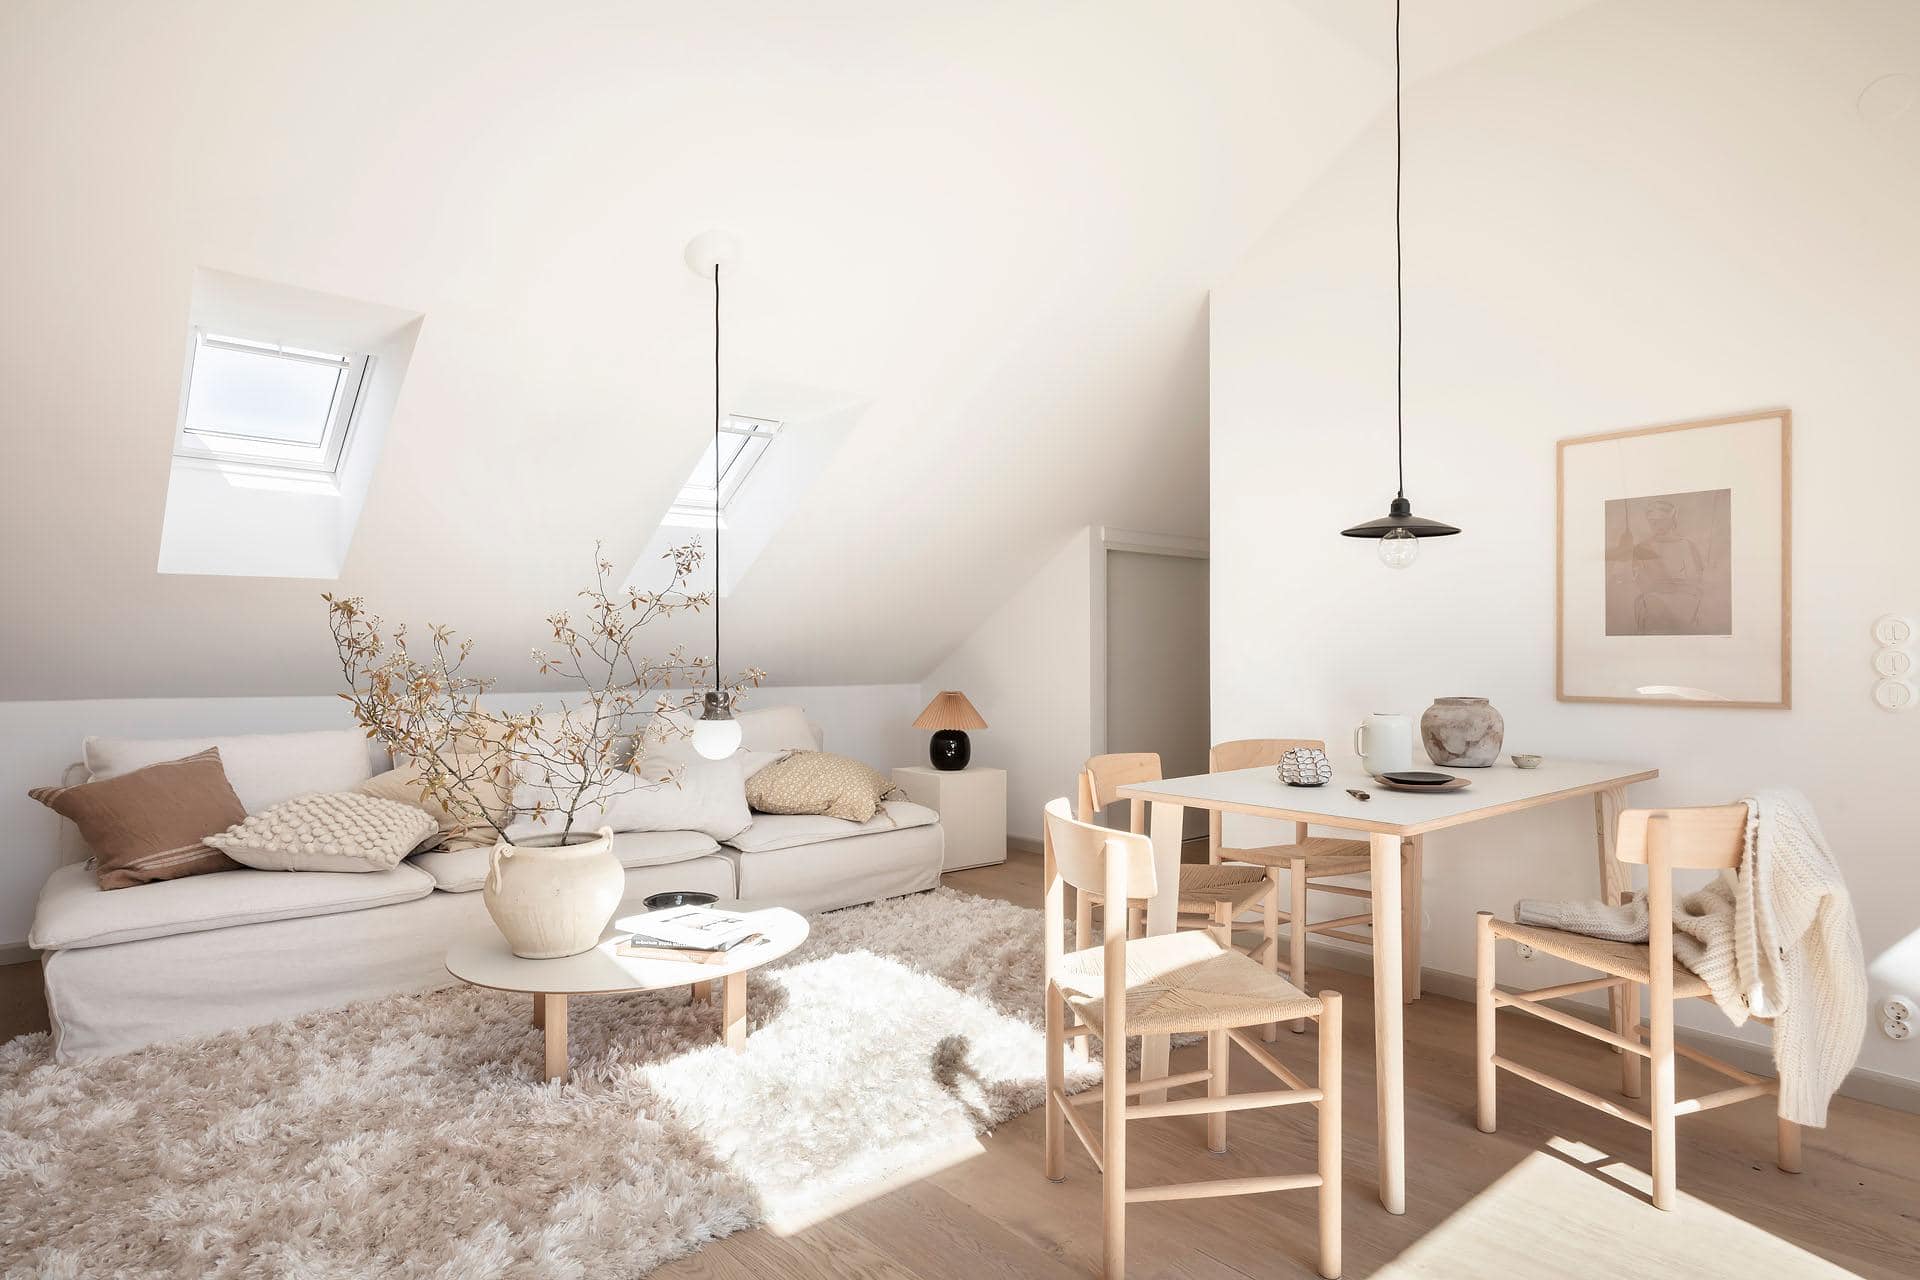 Home tour: Beige and off-white kitchen in an attic apartment 